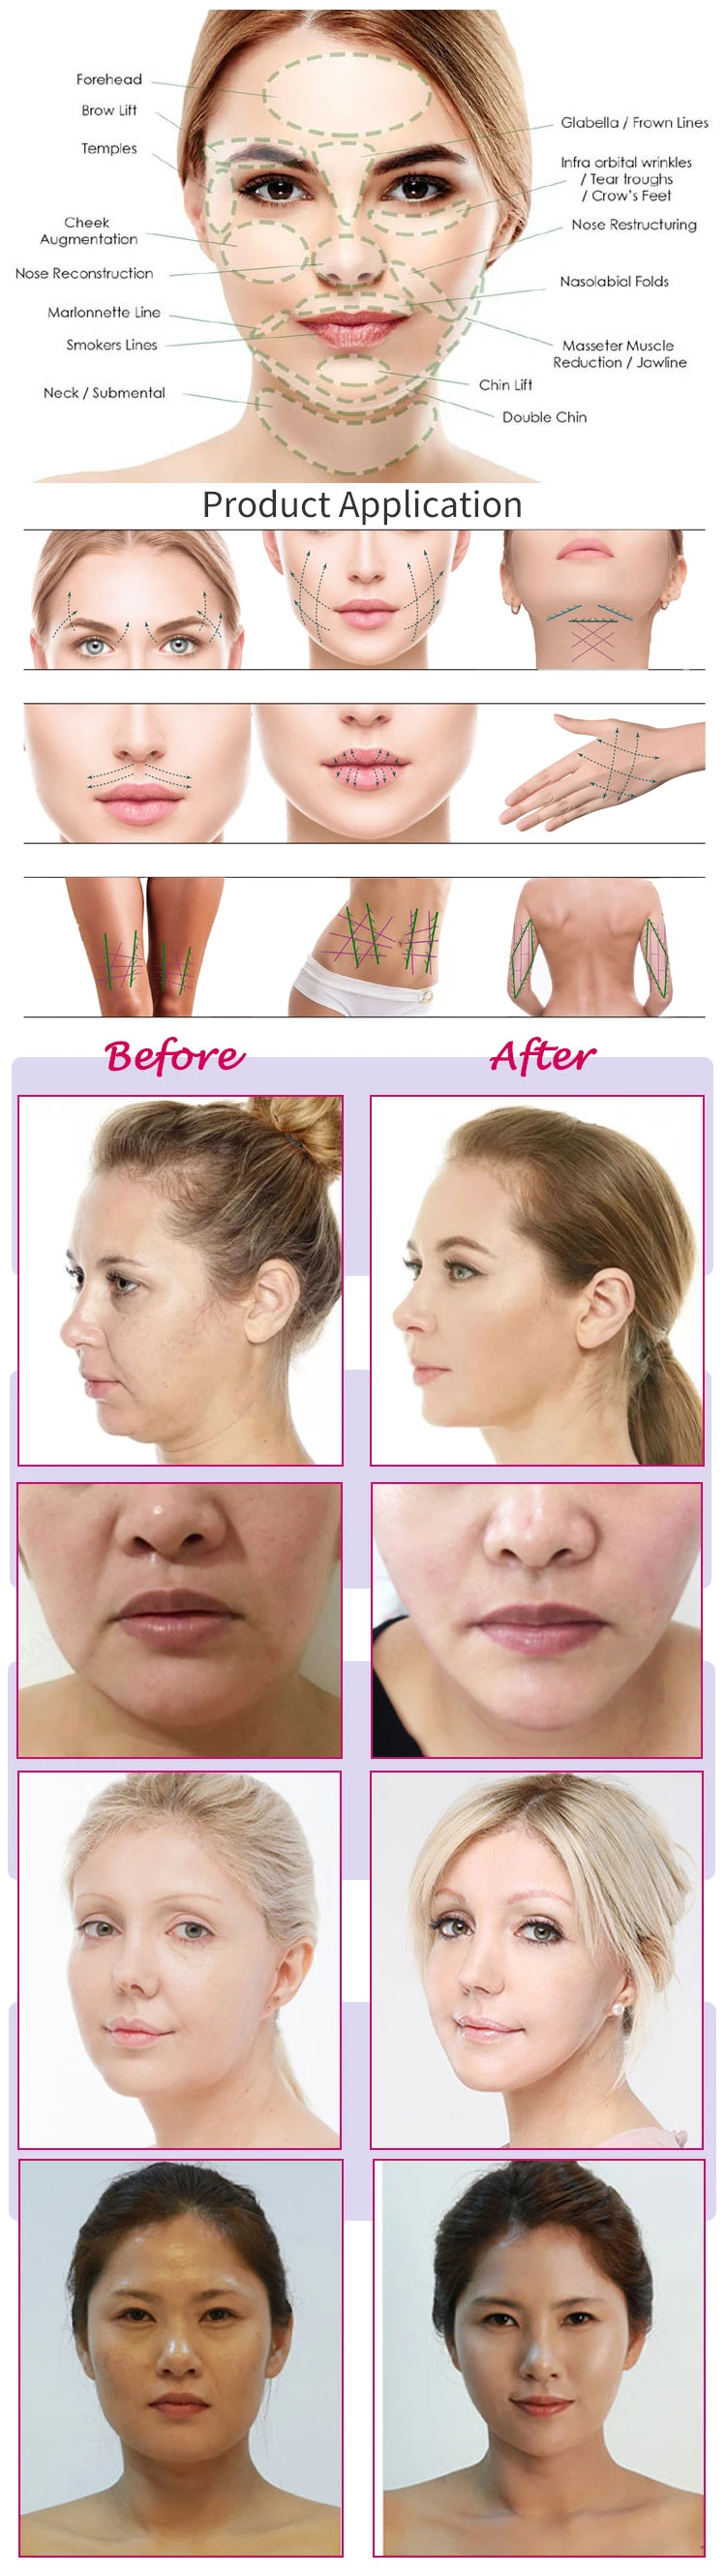 Fillers Thread The Face and Eye Lift Pdo Mono Screw Thread